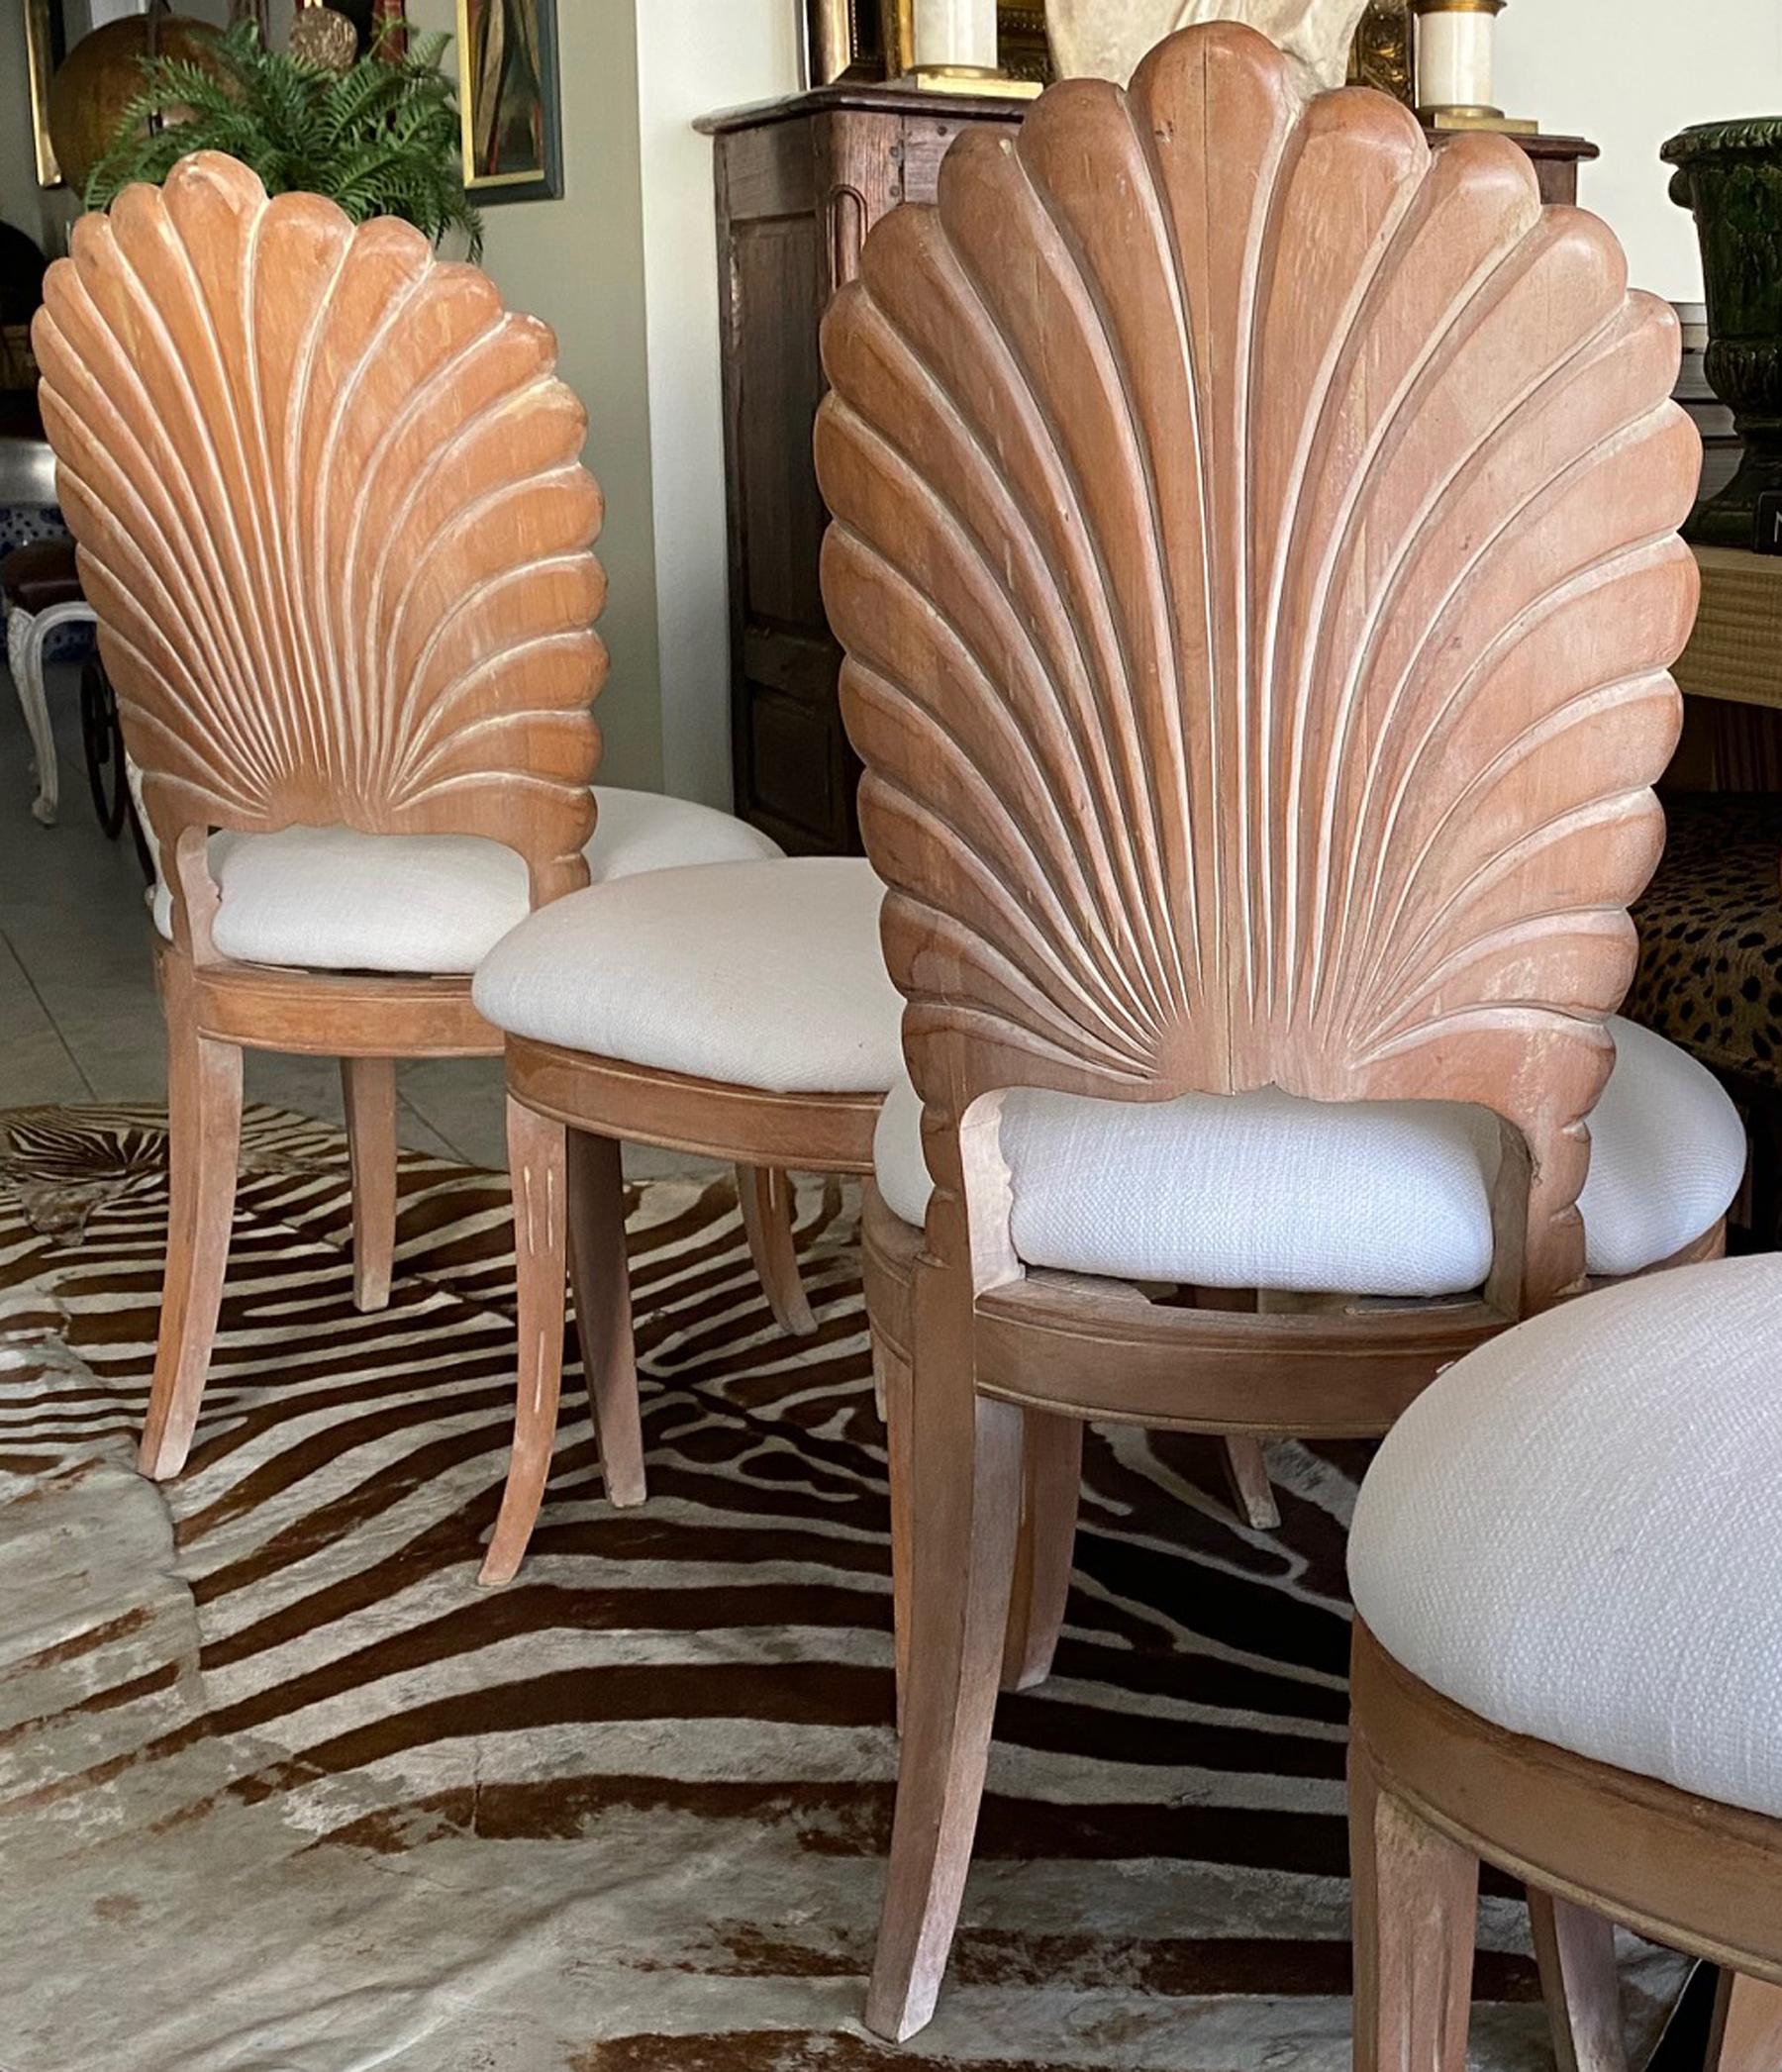 Four shell back dining chairs. These grotto dining chairs were made in Spain. Craved wood shell back chairs with a white wash to clear finish. Newly upholstered seats in white linen fabric make these chairs ready to use.